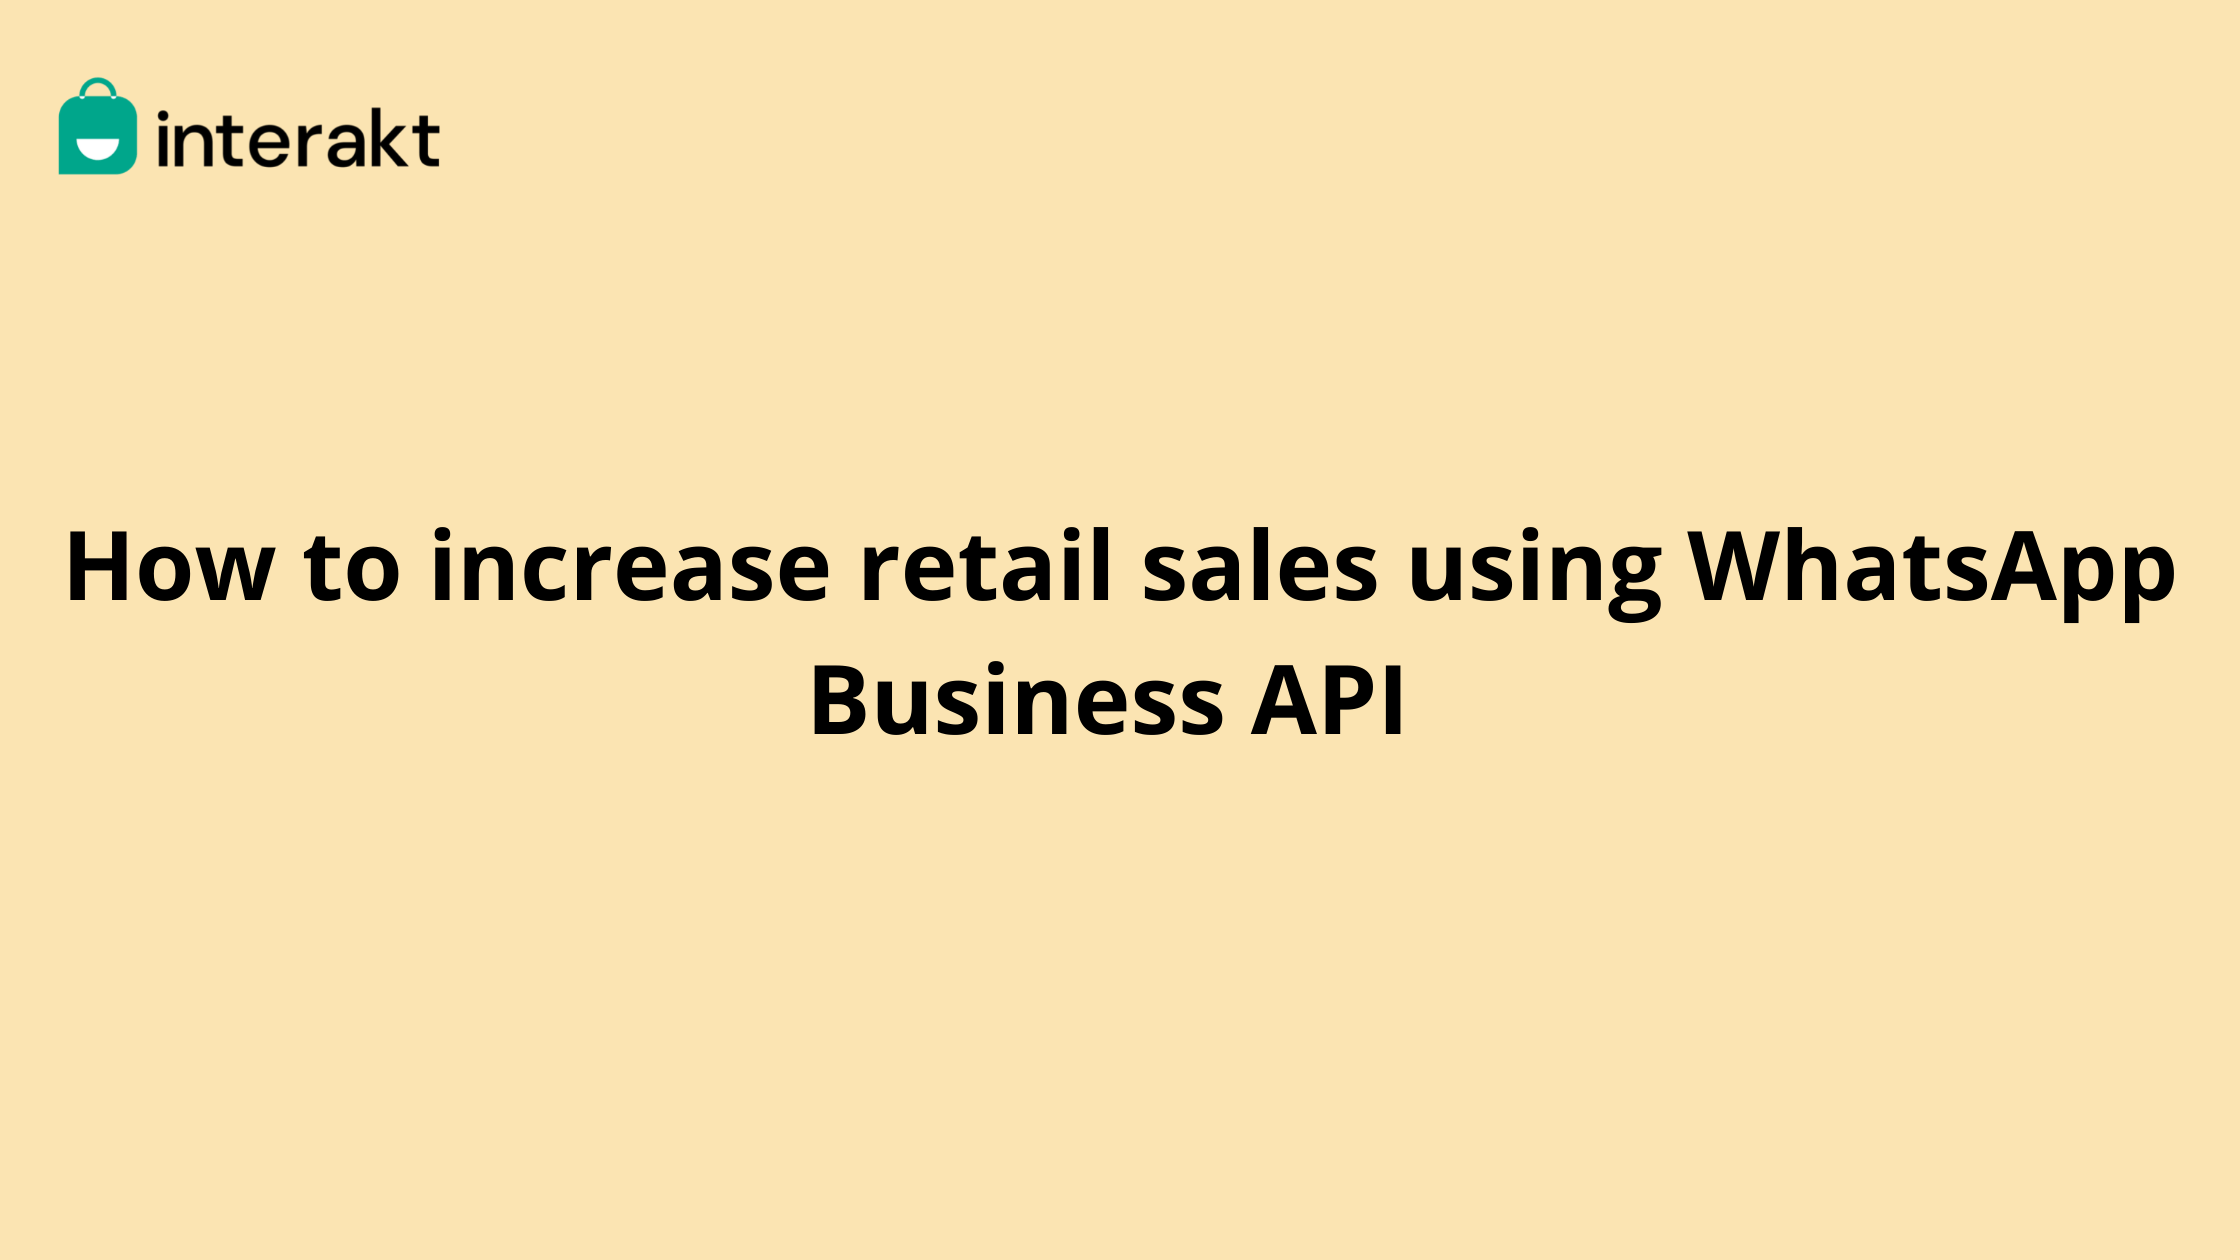 How to increase retail sales using WhatsApp